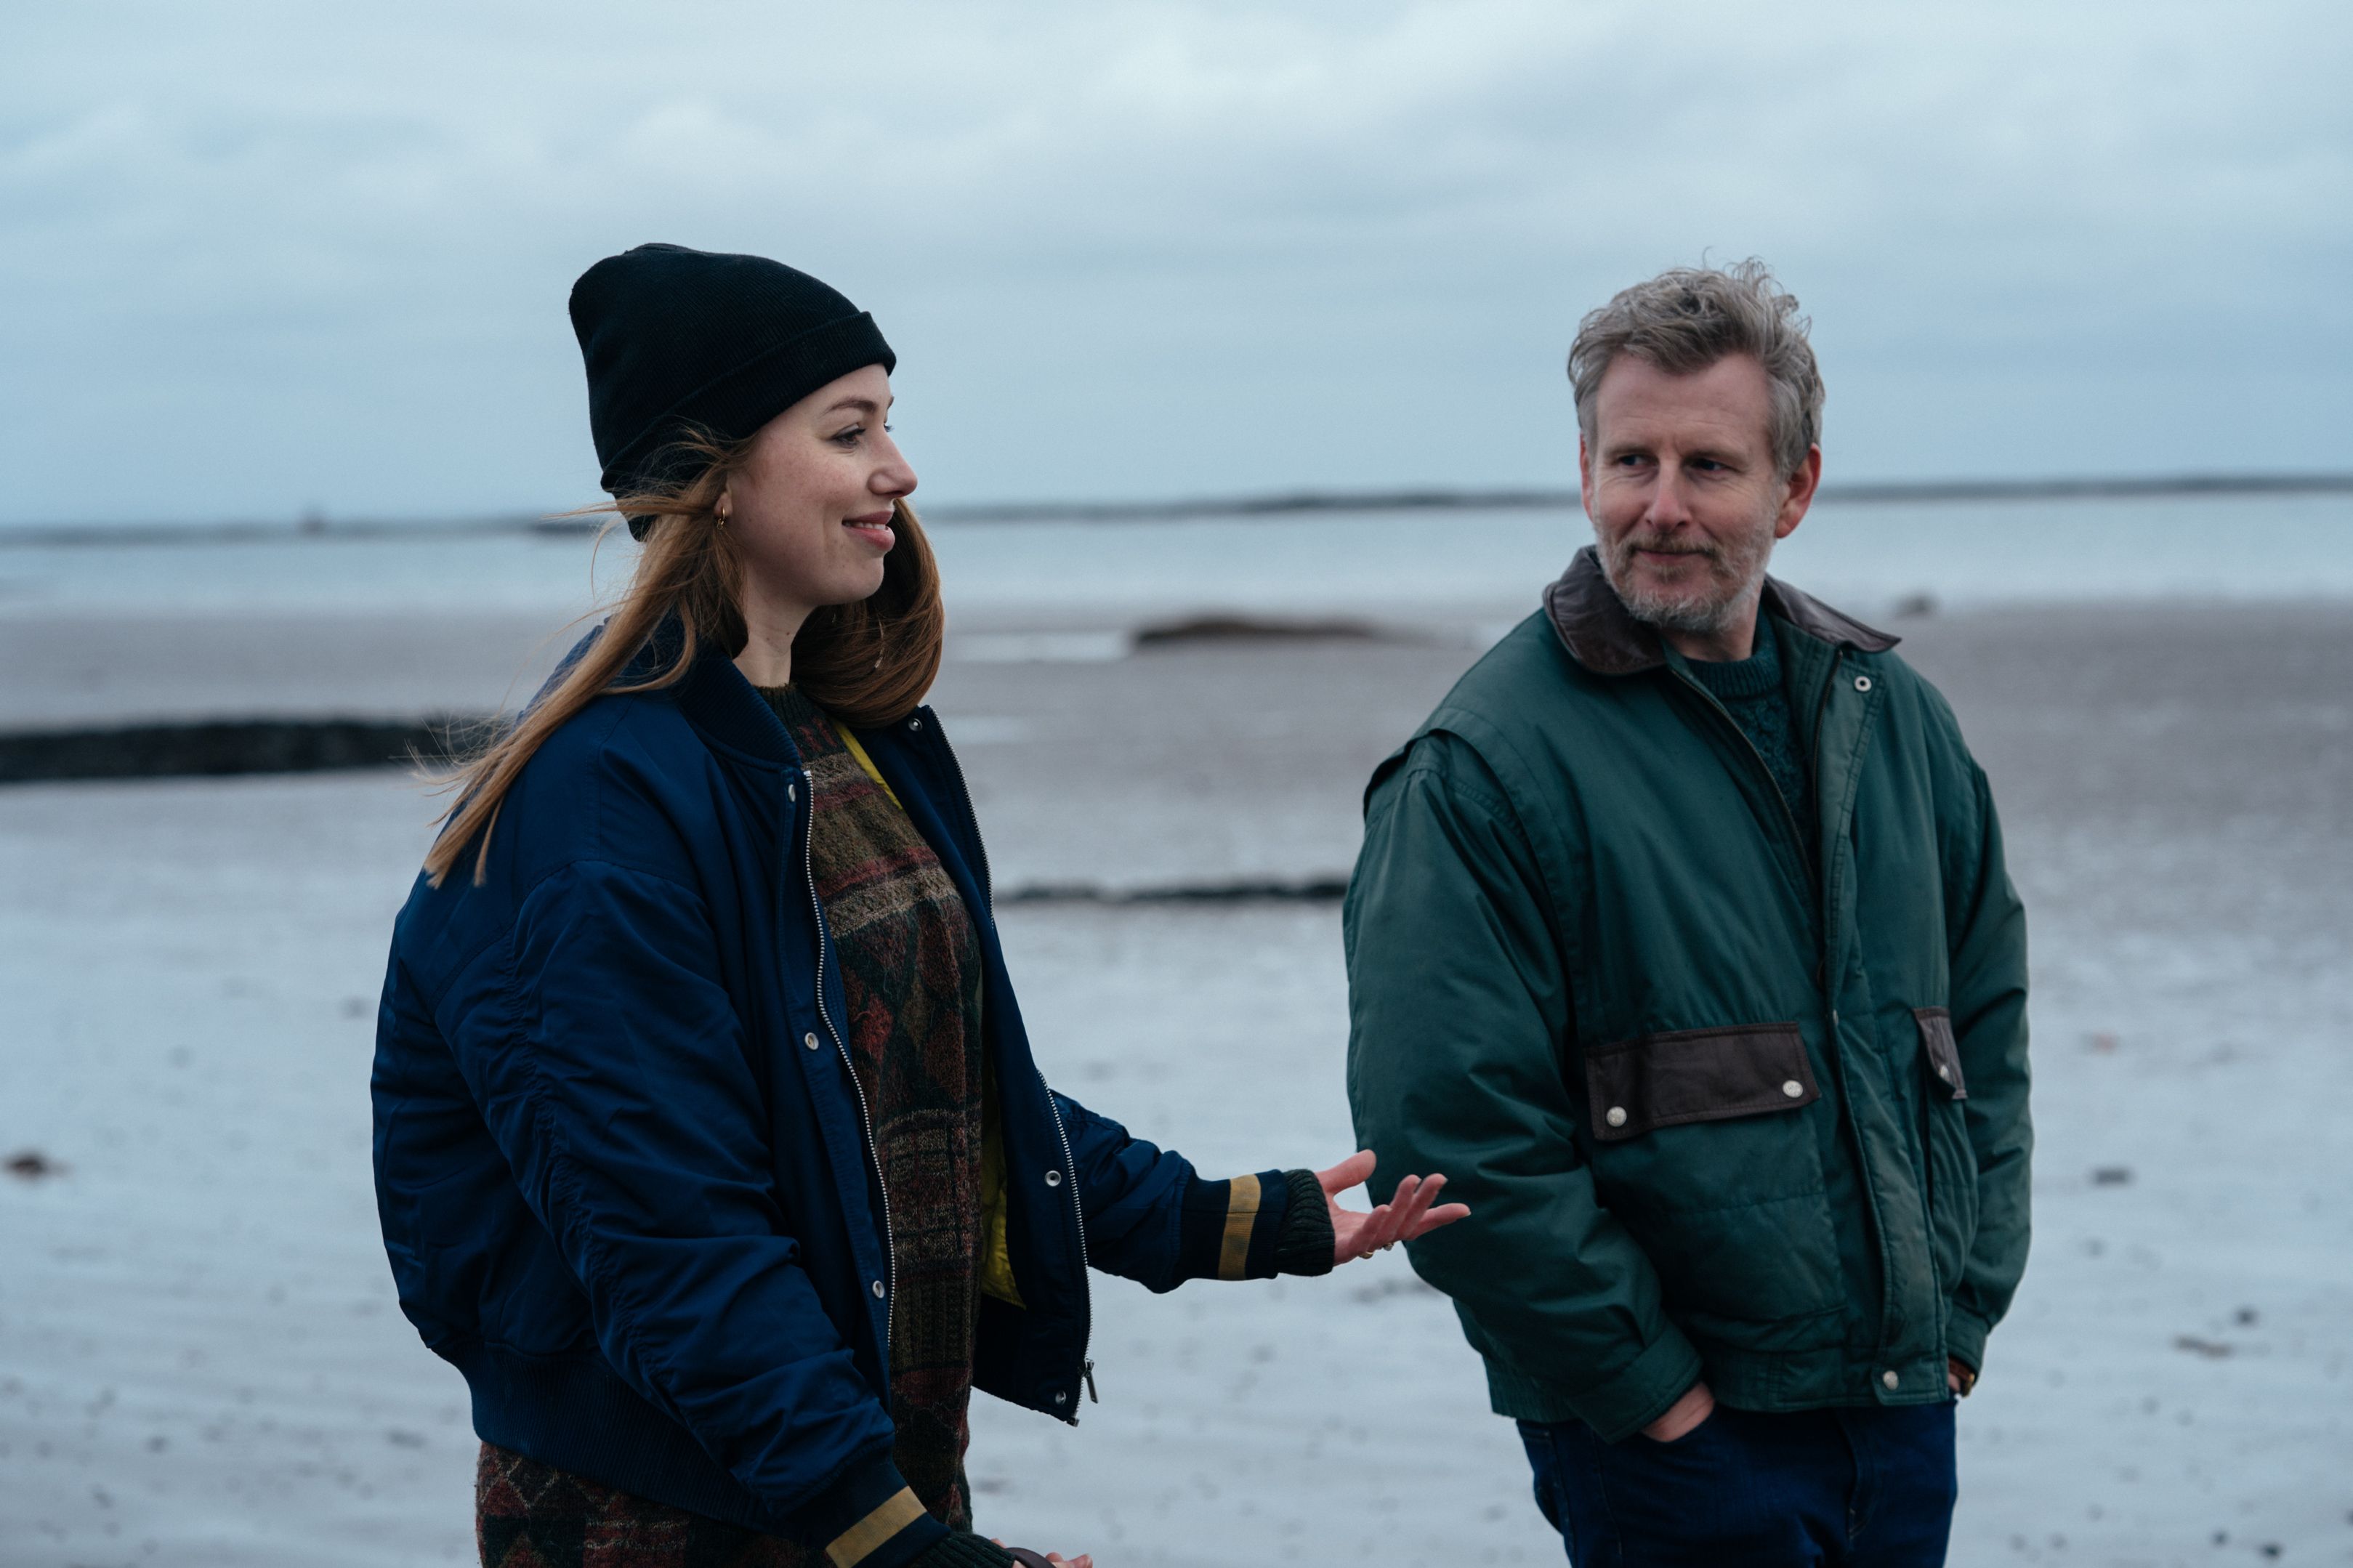 Ballywalter review: Patrick Kielty is a revelation and Seána Kerslake exemplary in this moving drama